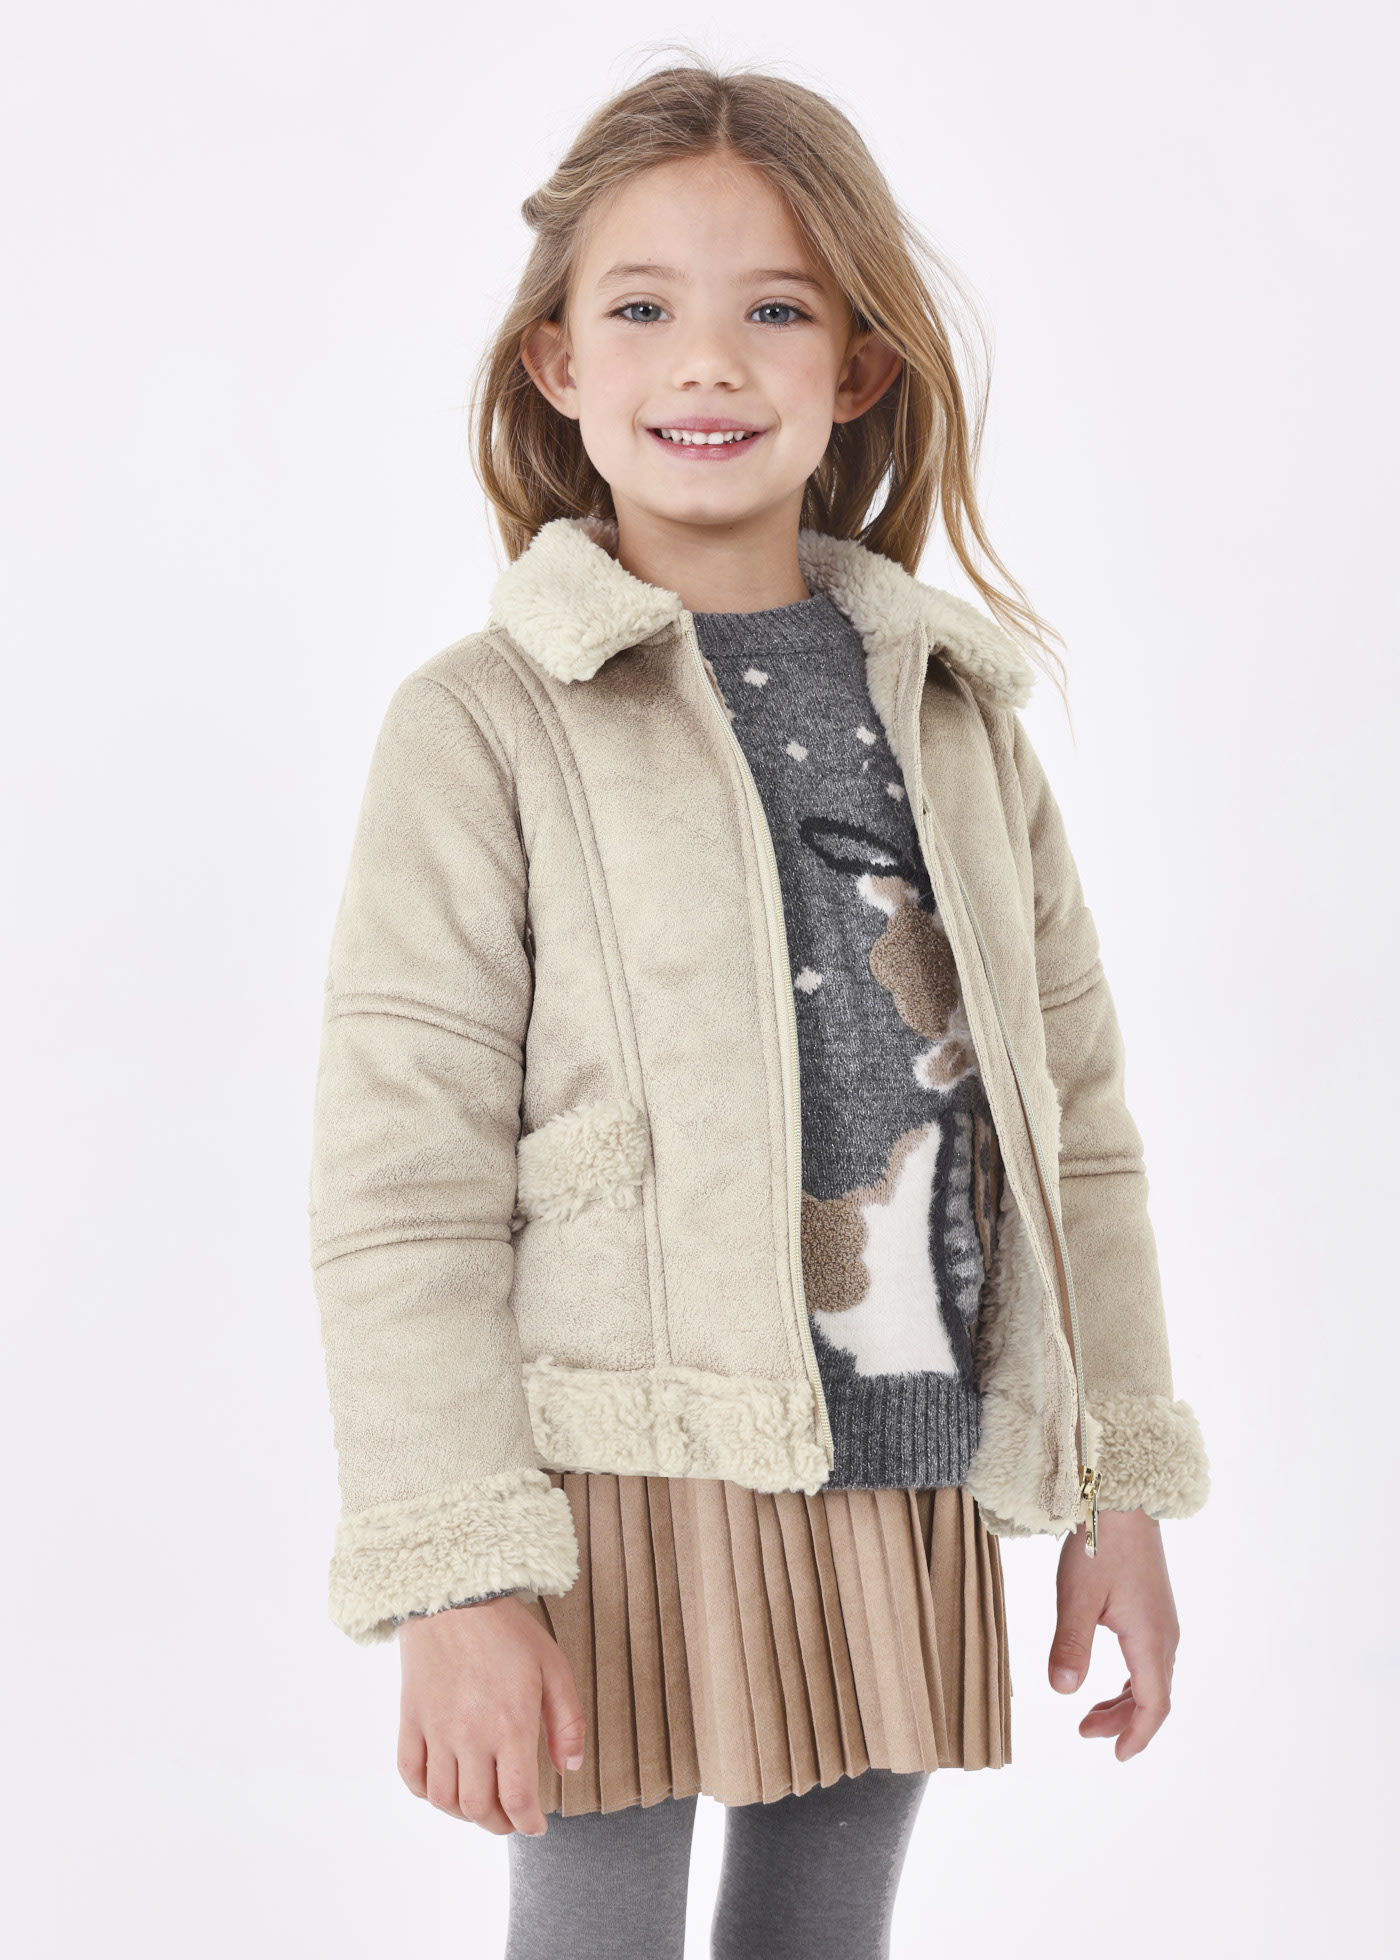 Girls Coats and Winter Jackets 2-16 Years